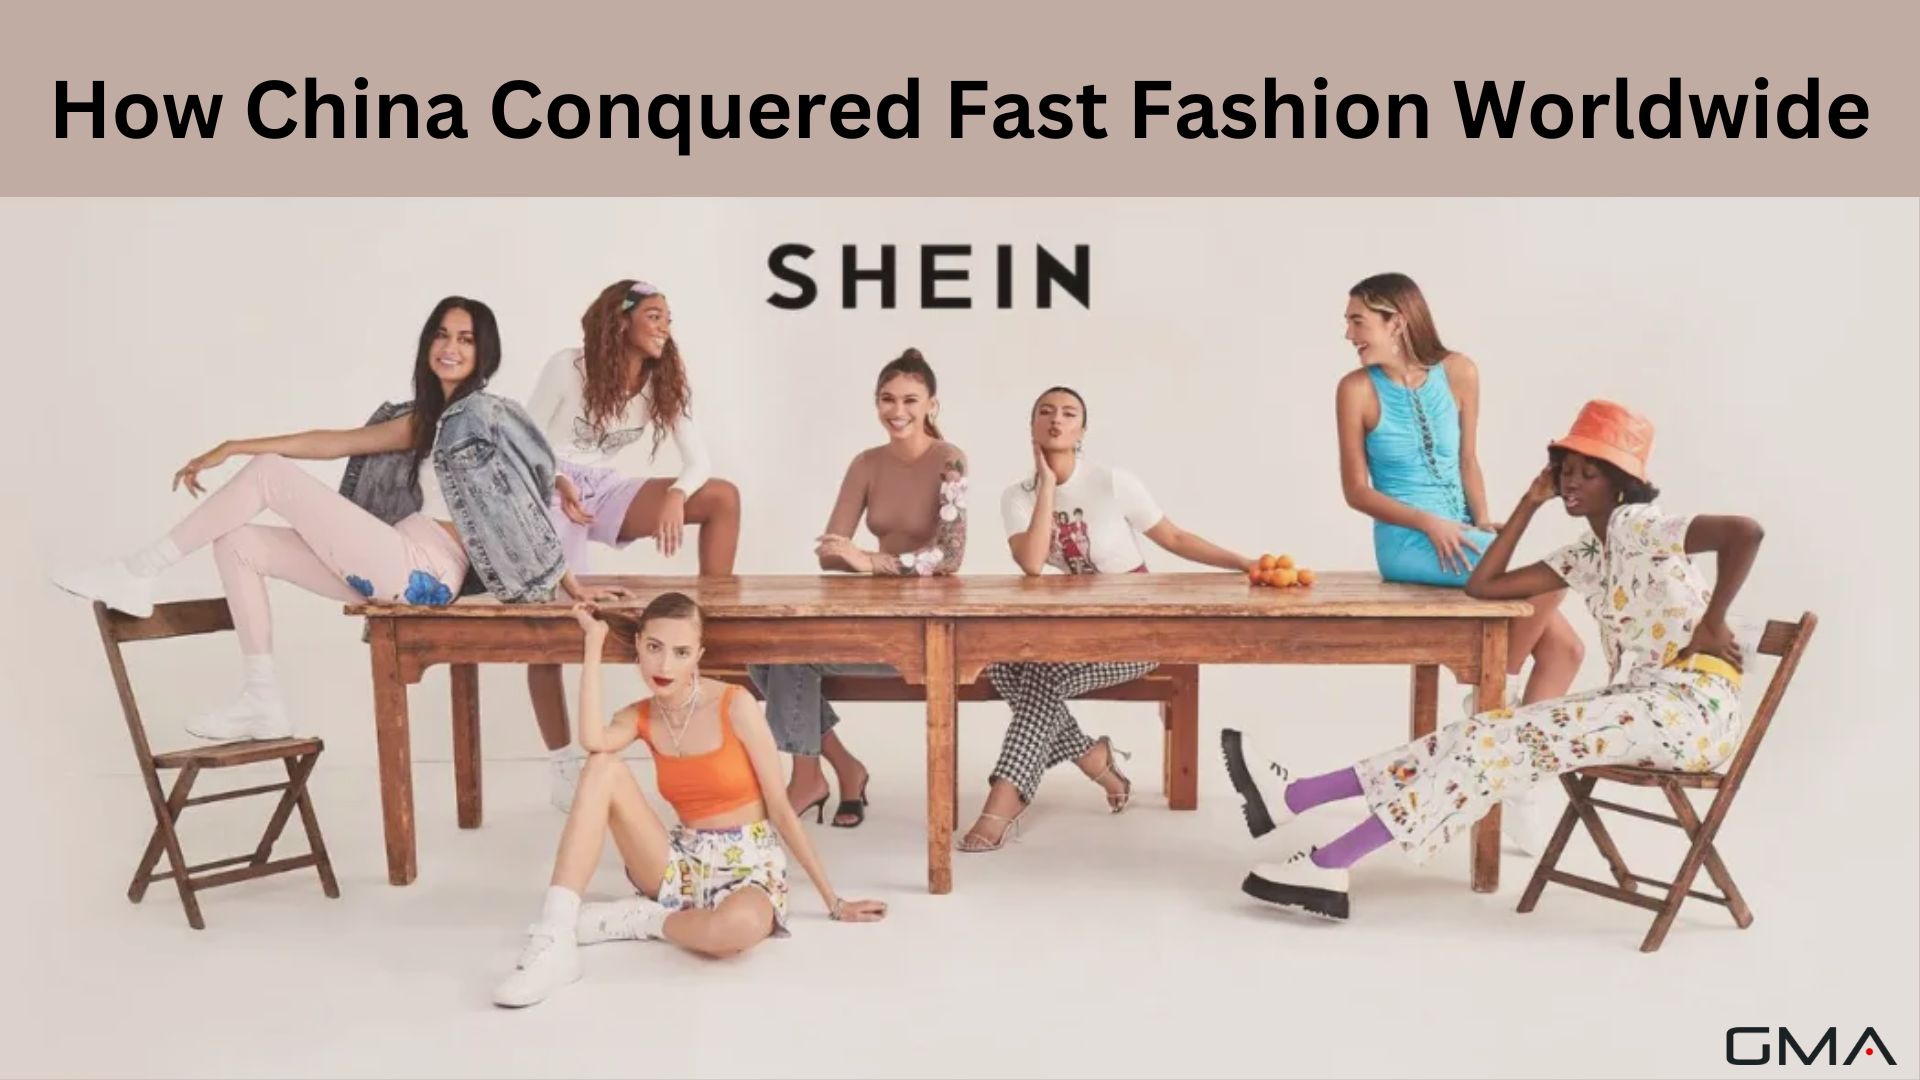 How China Conquered Fast Fashion Worldwide